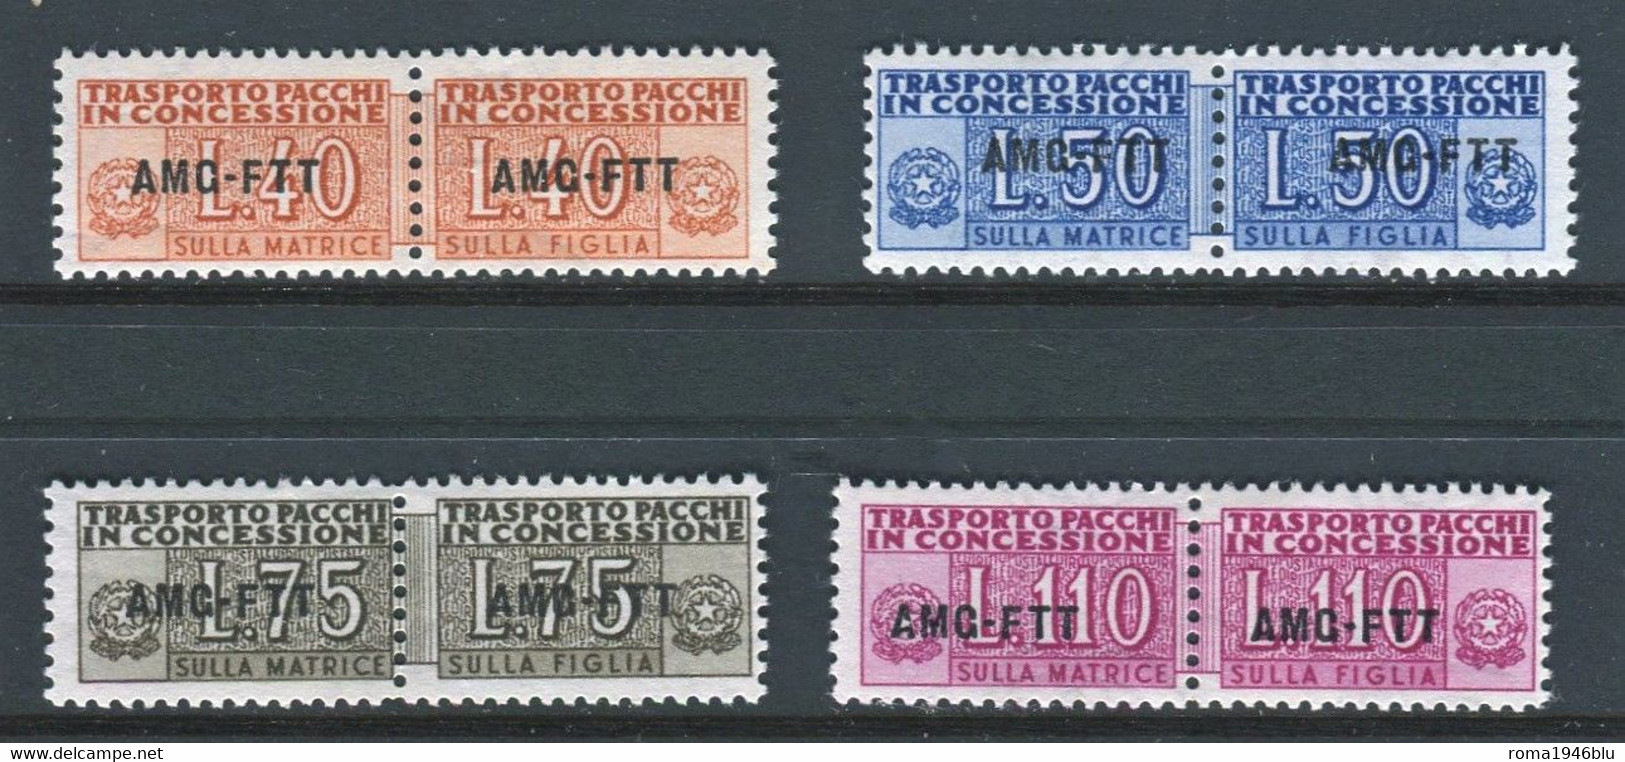 TRIESTE 1953 PACCHI CONCESSIONE 4 V. ** MNH - Mint/hinged